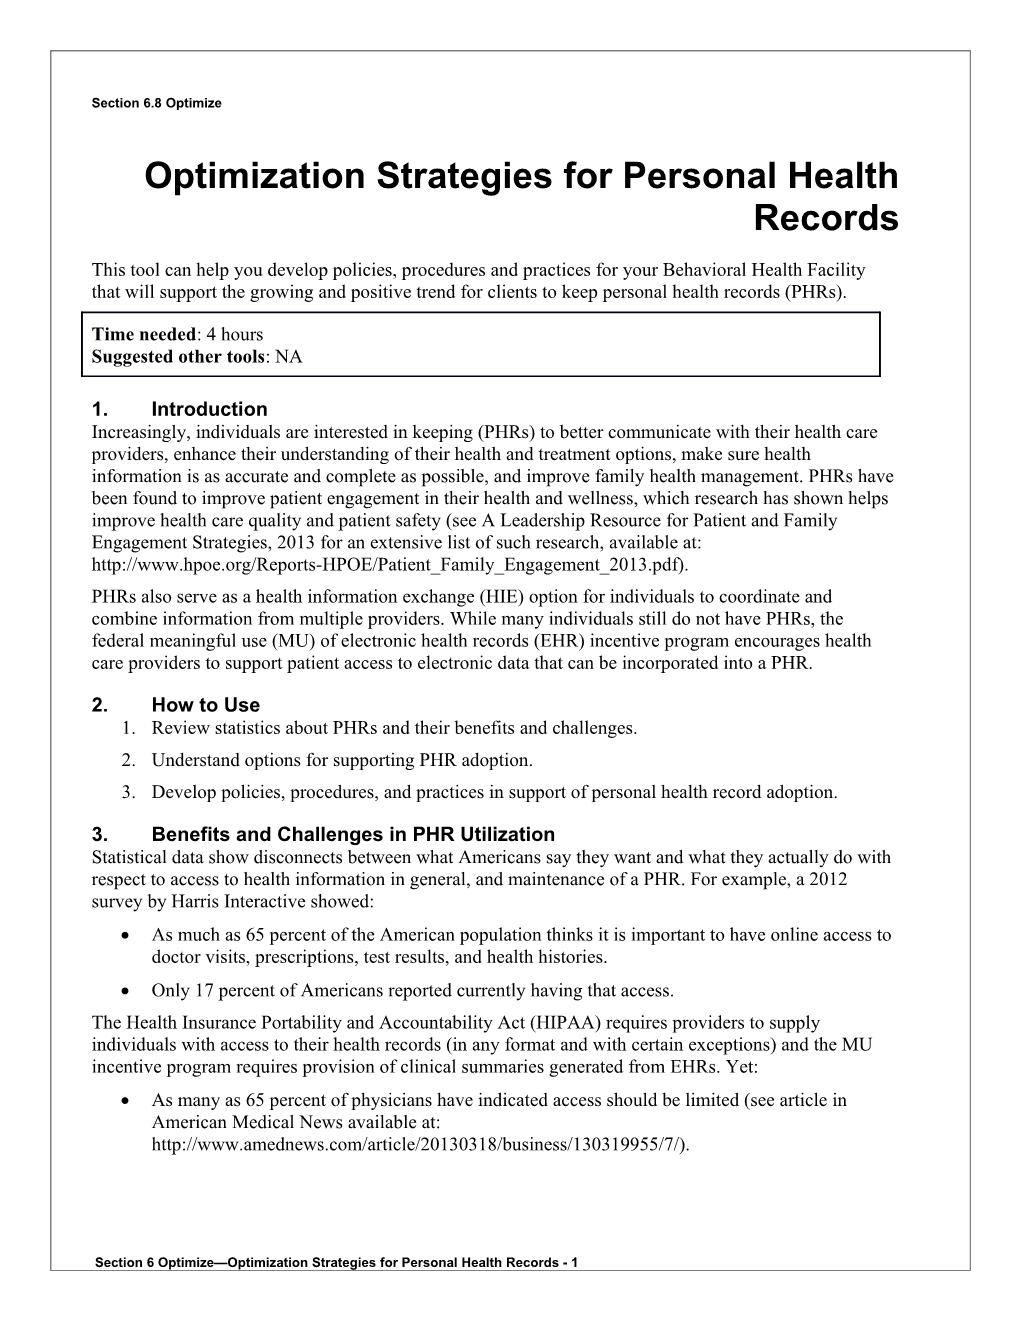 6 Optimization Strategies for Personal Health Records